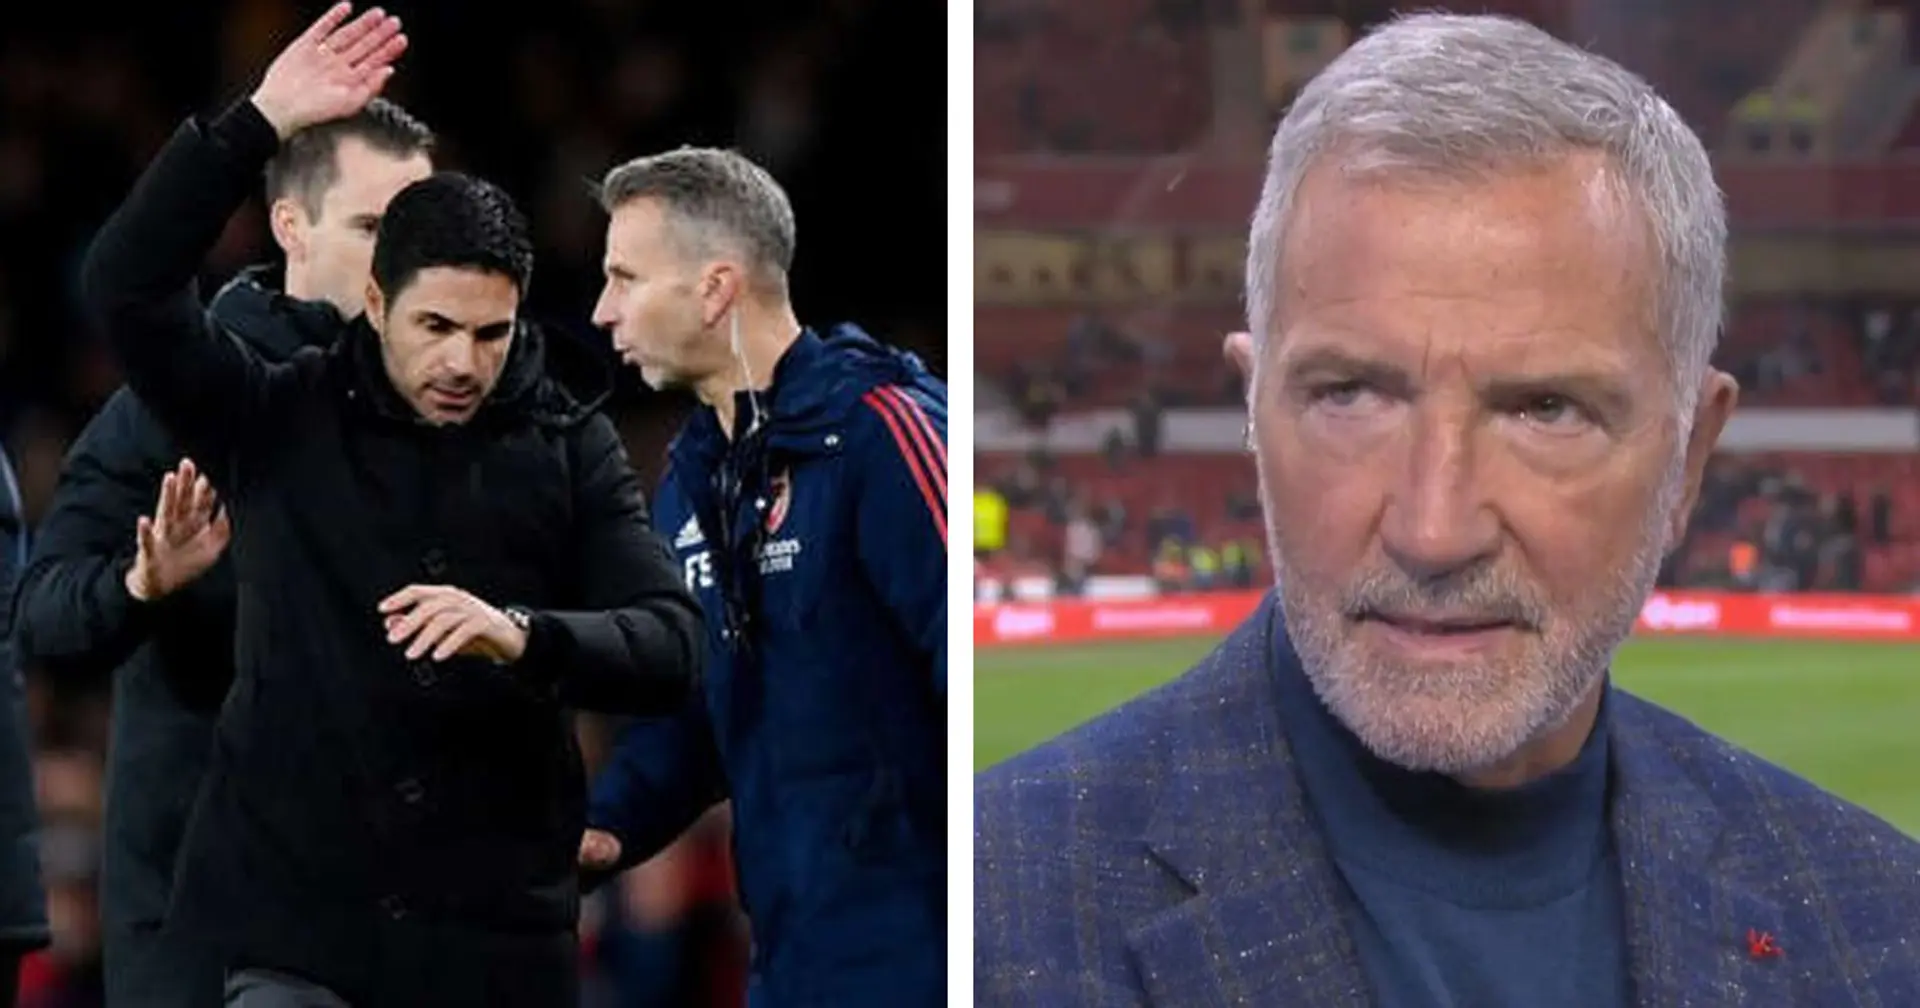 'This is new territory for him': Graeme Souness warns Arteta about touchline outburst